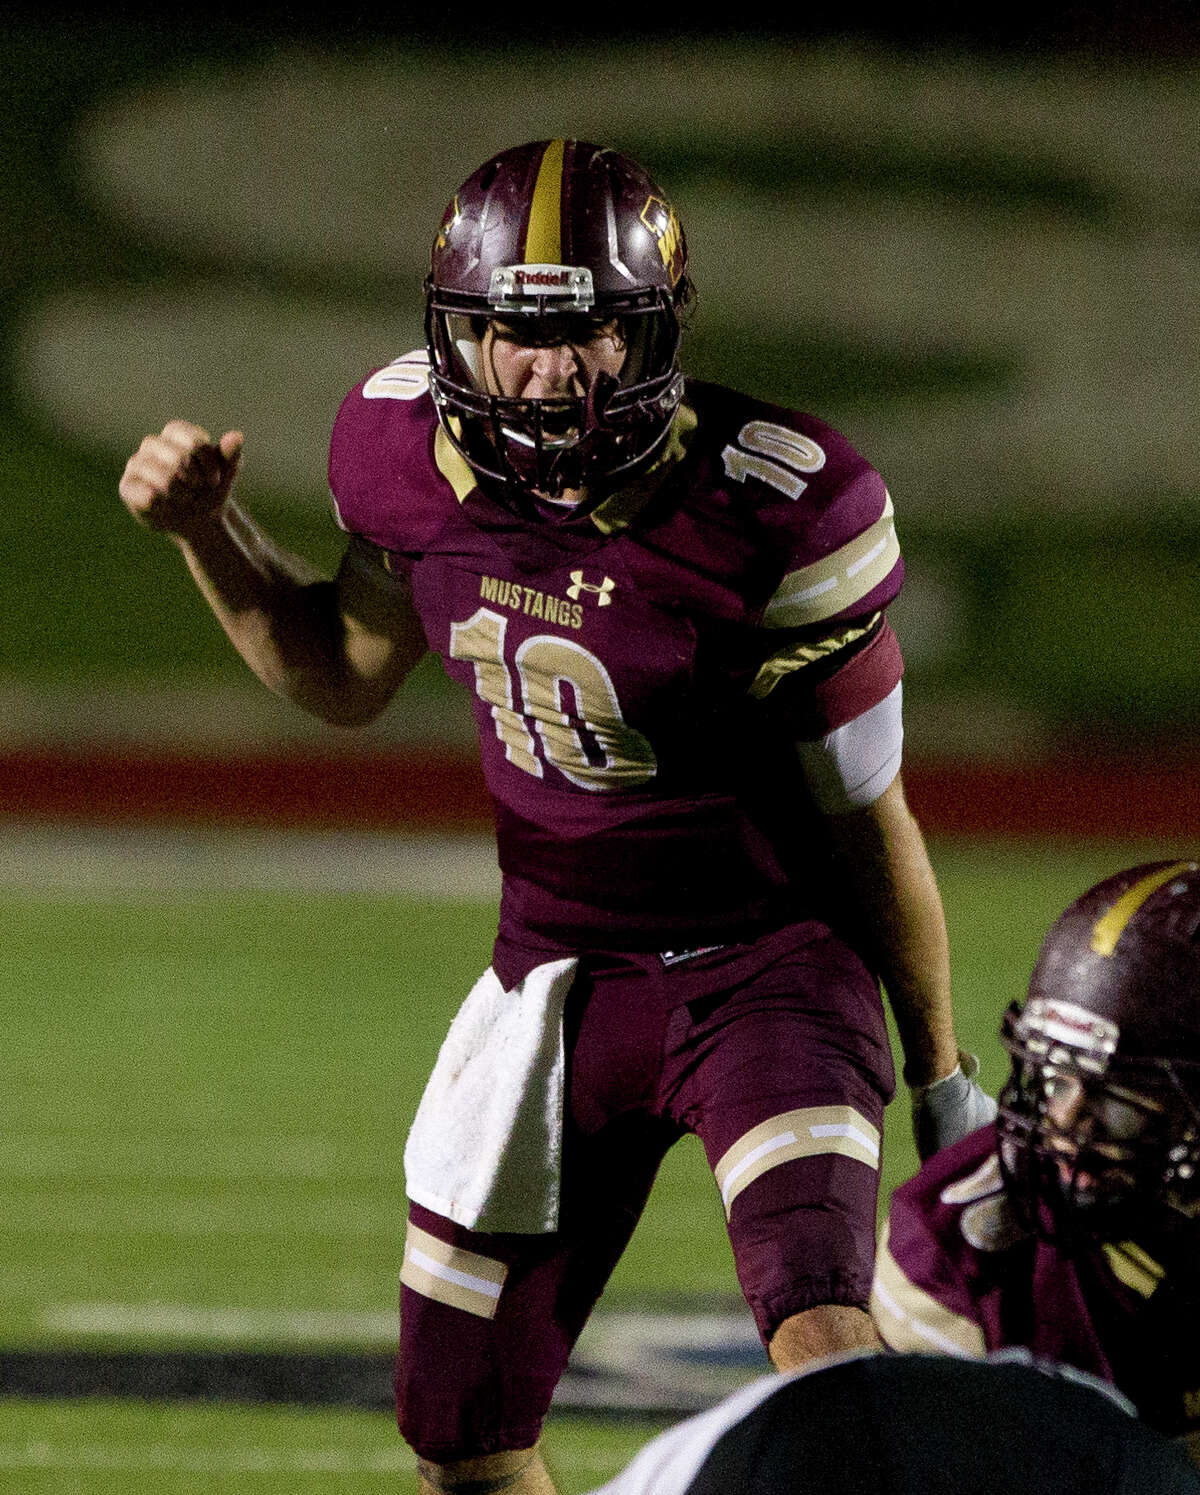 Magnolia West quarterback John Matocha (10) reacts after the team was called for a false start during the second quarter of a Region III-5A bi-district high school football game at Merrill Green Stadium, Friday, Nov. 17, 2017, in Bryan.